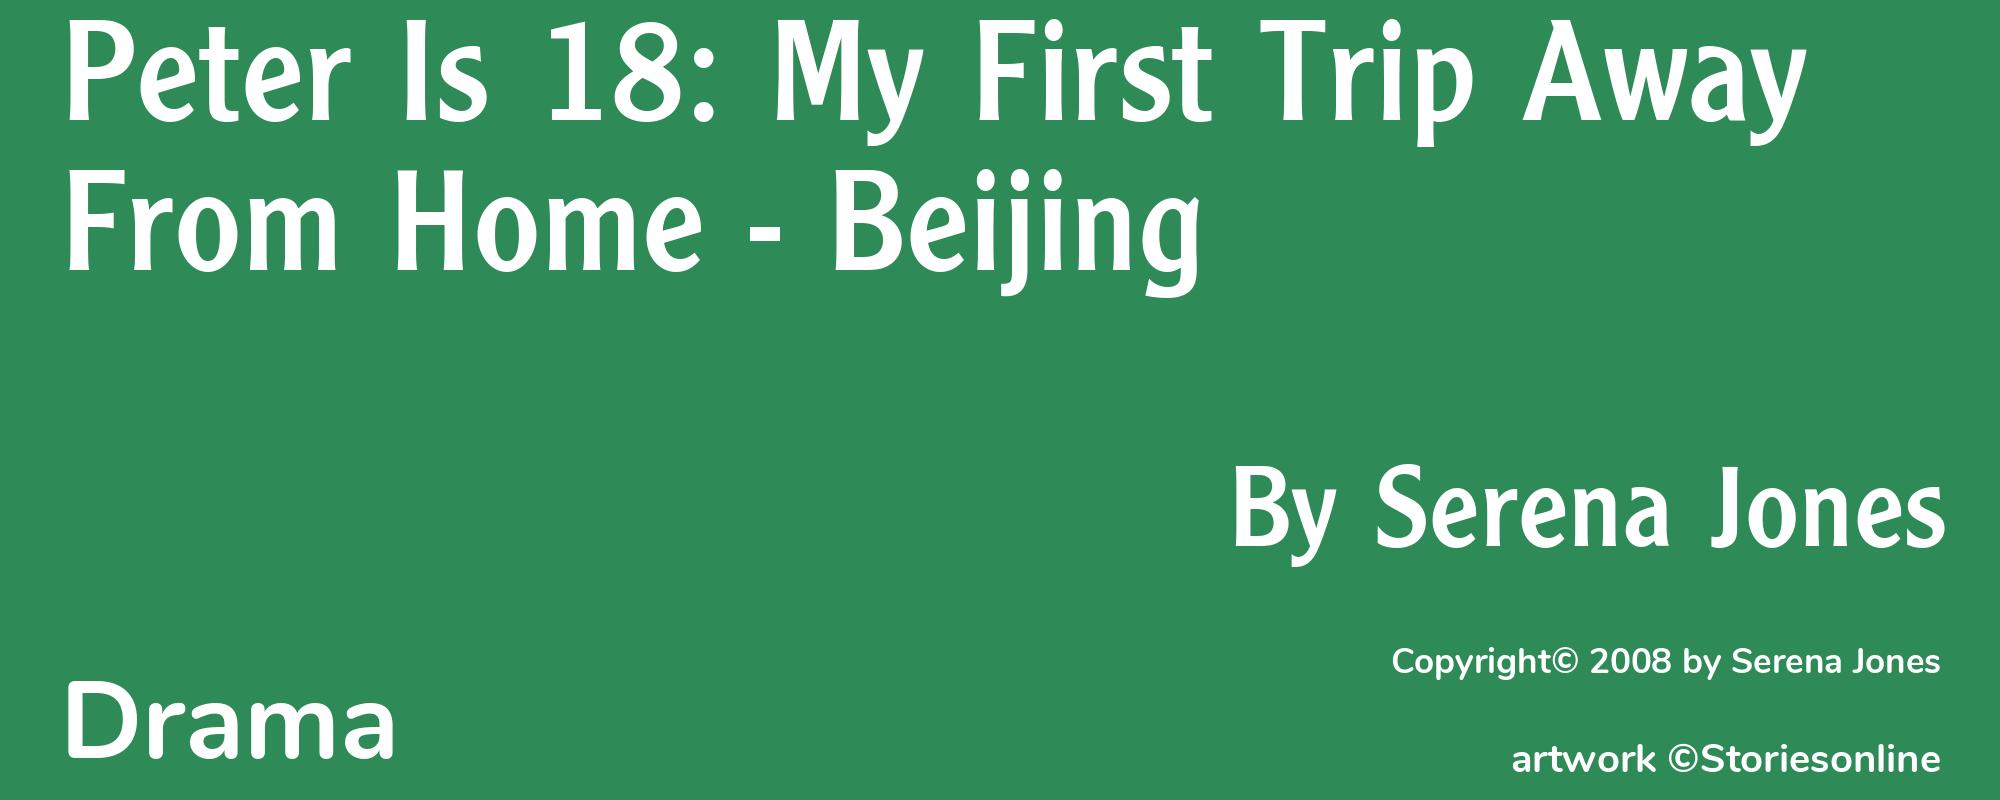 Peter Is 18: My First Trip Away From Home - Beijing - Cover